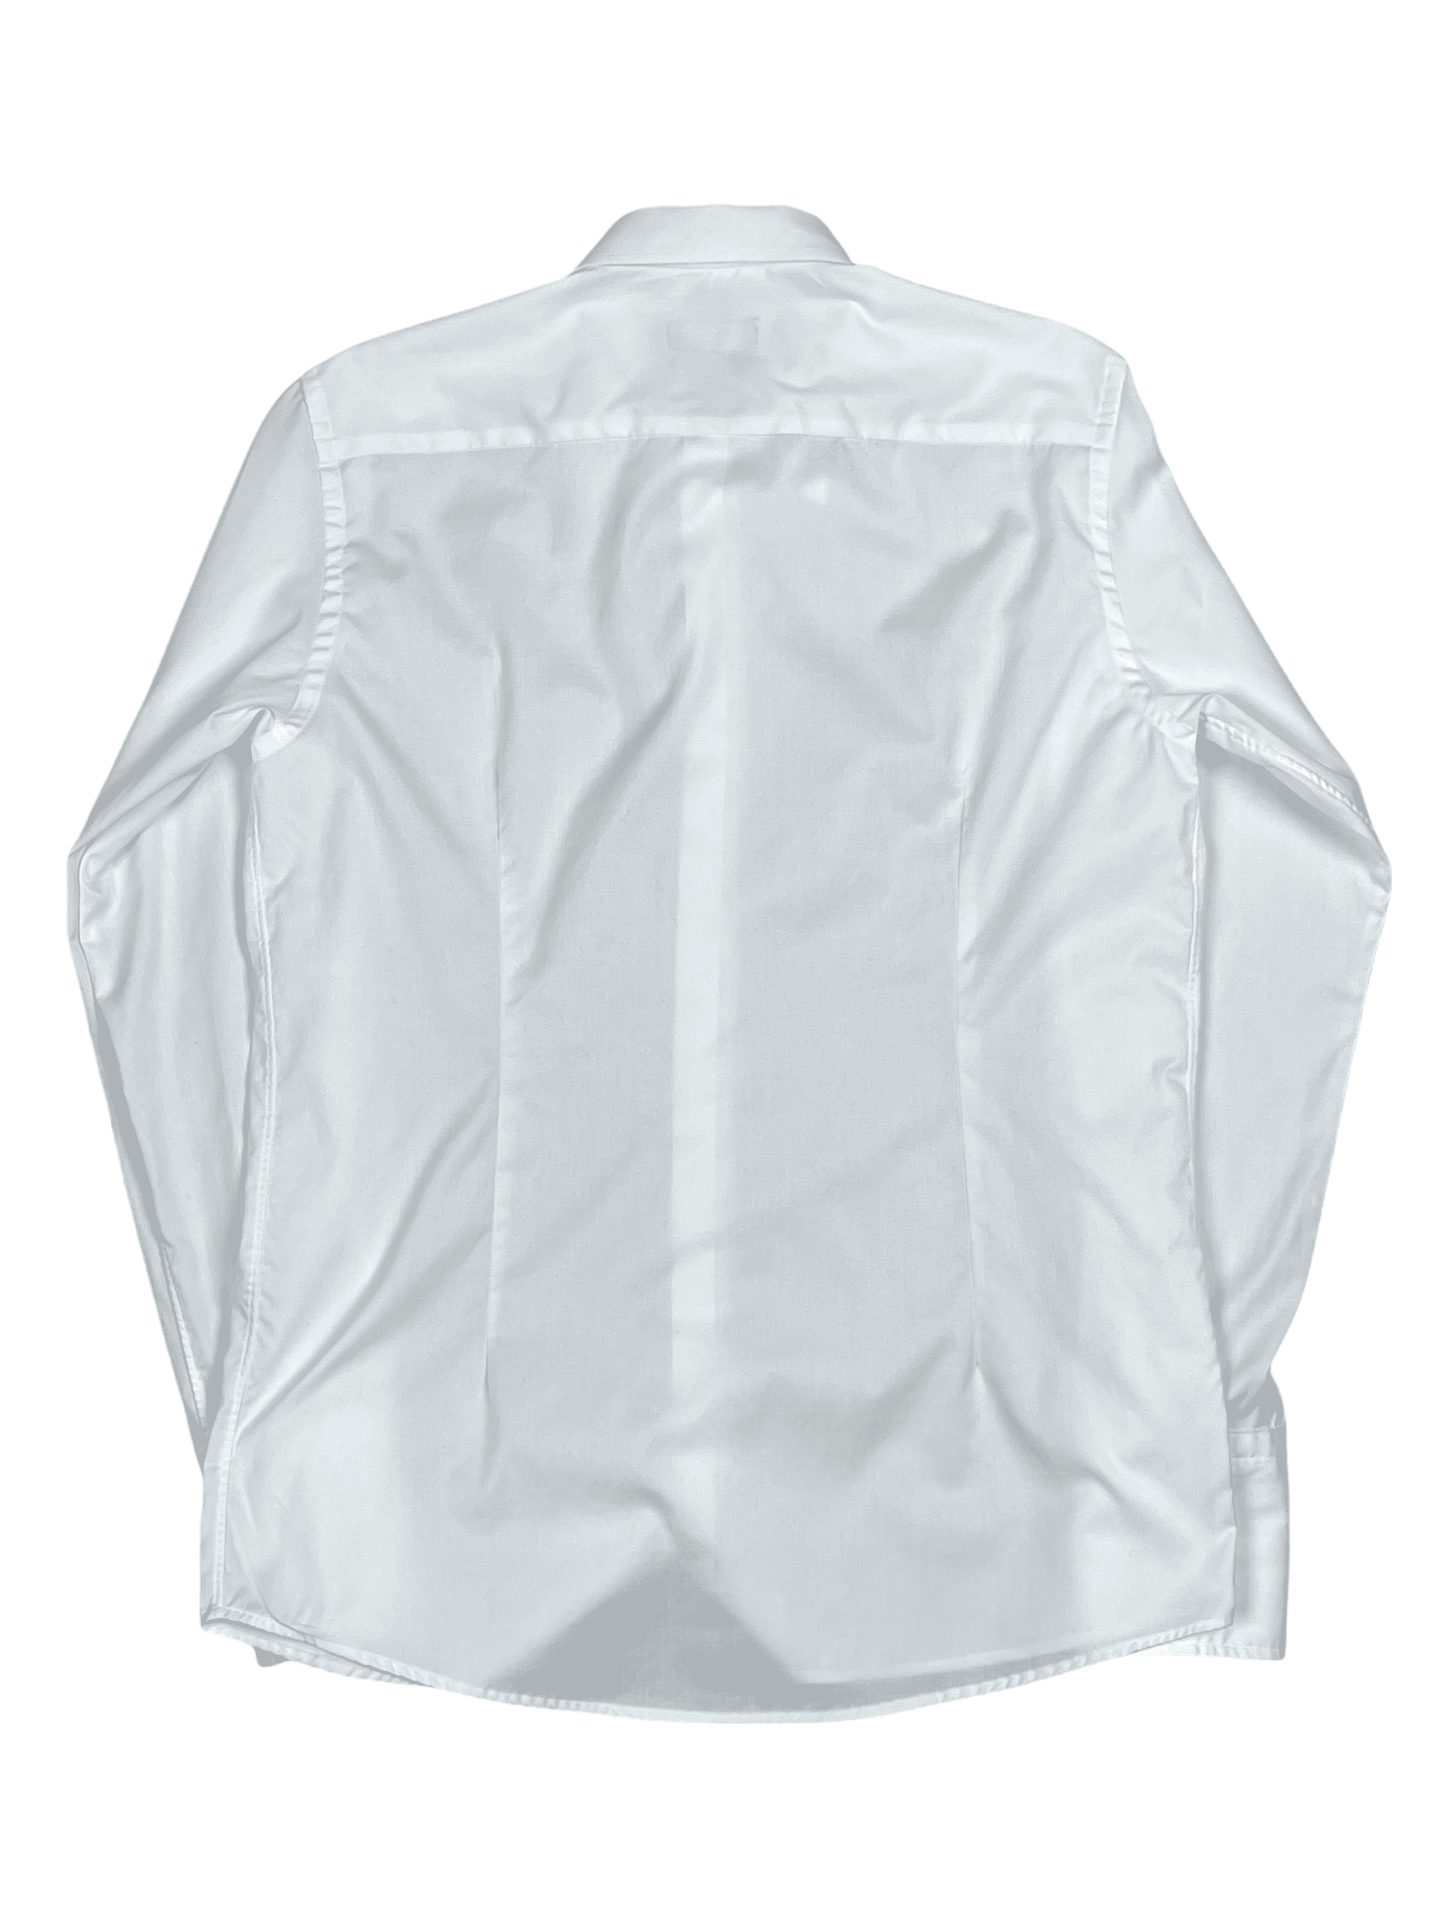 ETON White Cotton Dress Shirt 16.5 / 42 - Genuine Design Luxury Consignment for Men. New & Pre-Owned Clothing, Shoes, & Accessories. Calgary, Canada